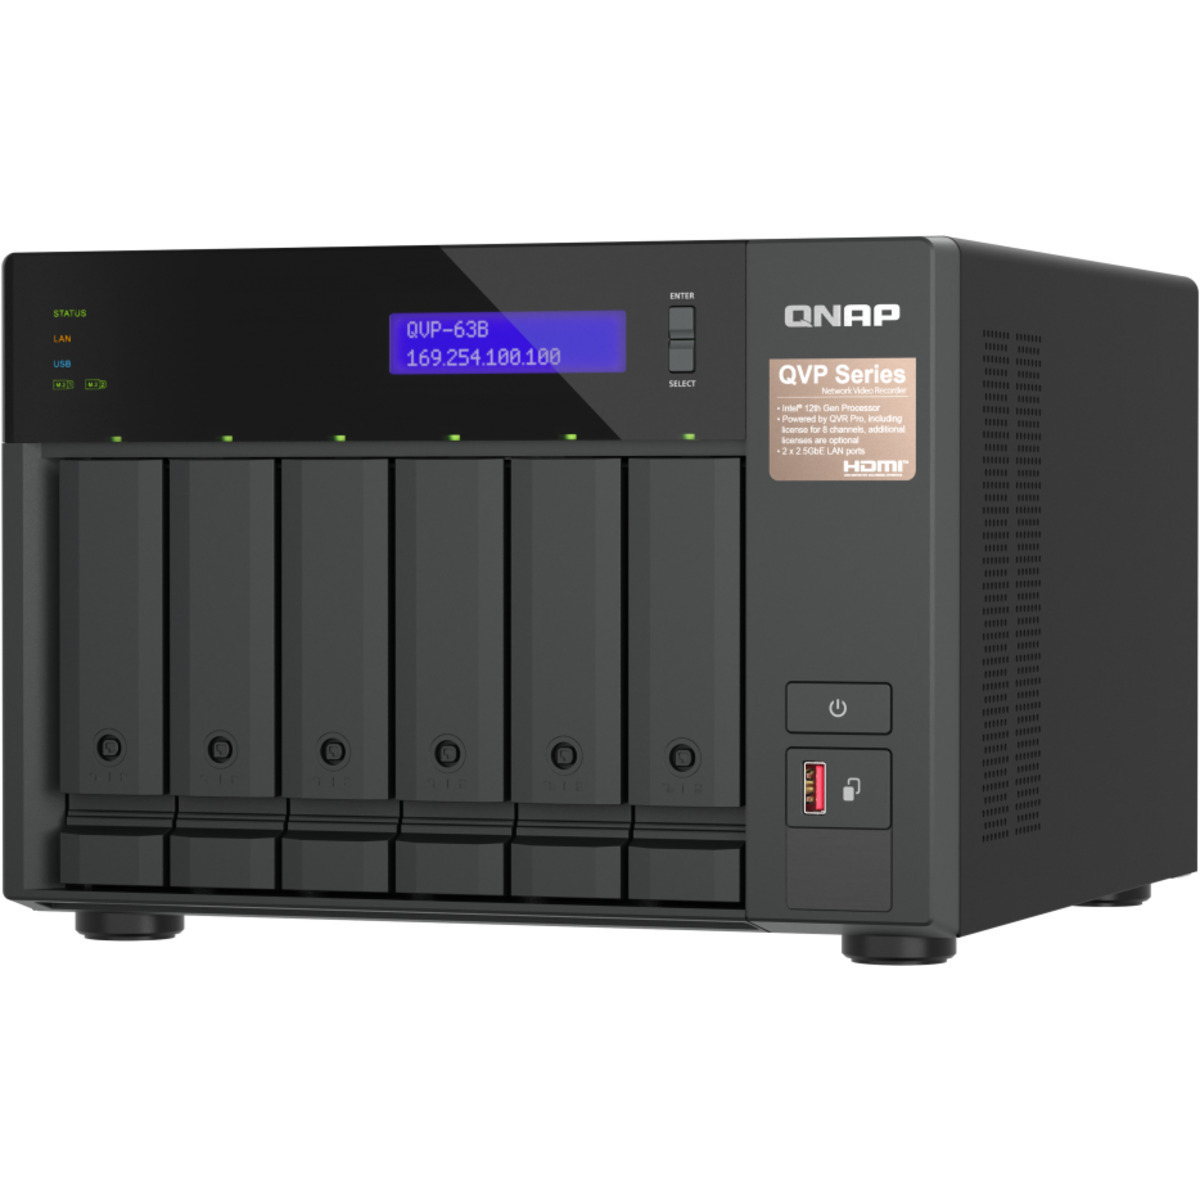 buy QNAP QVP-63B 36tb Desktop NVR - Network Video Recorder 6x6000gb Western Digital Red WD60EFAX 3.5 5400rpm SATA 6Gb/s HDD NAS Class Drives Installed - Burn-In Tested - ON SALE - nas headquarters buy network attached storage server device das new raid-5 free shipping simply usa QVP-63B